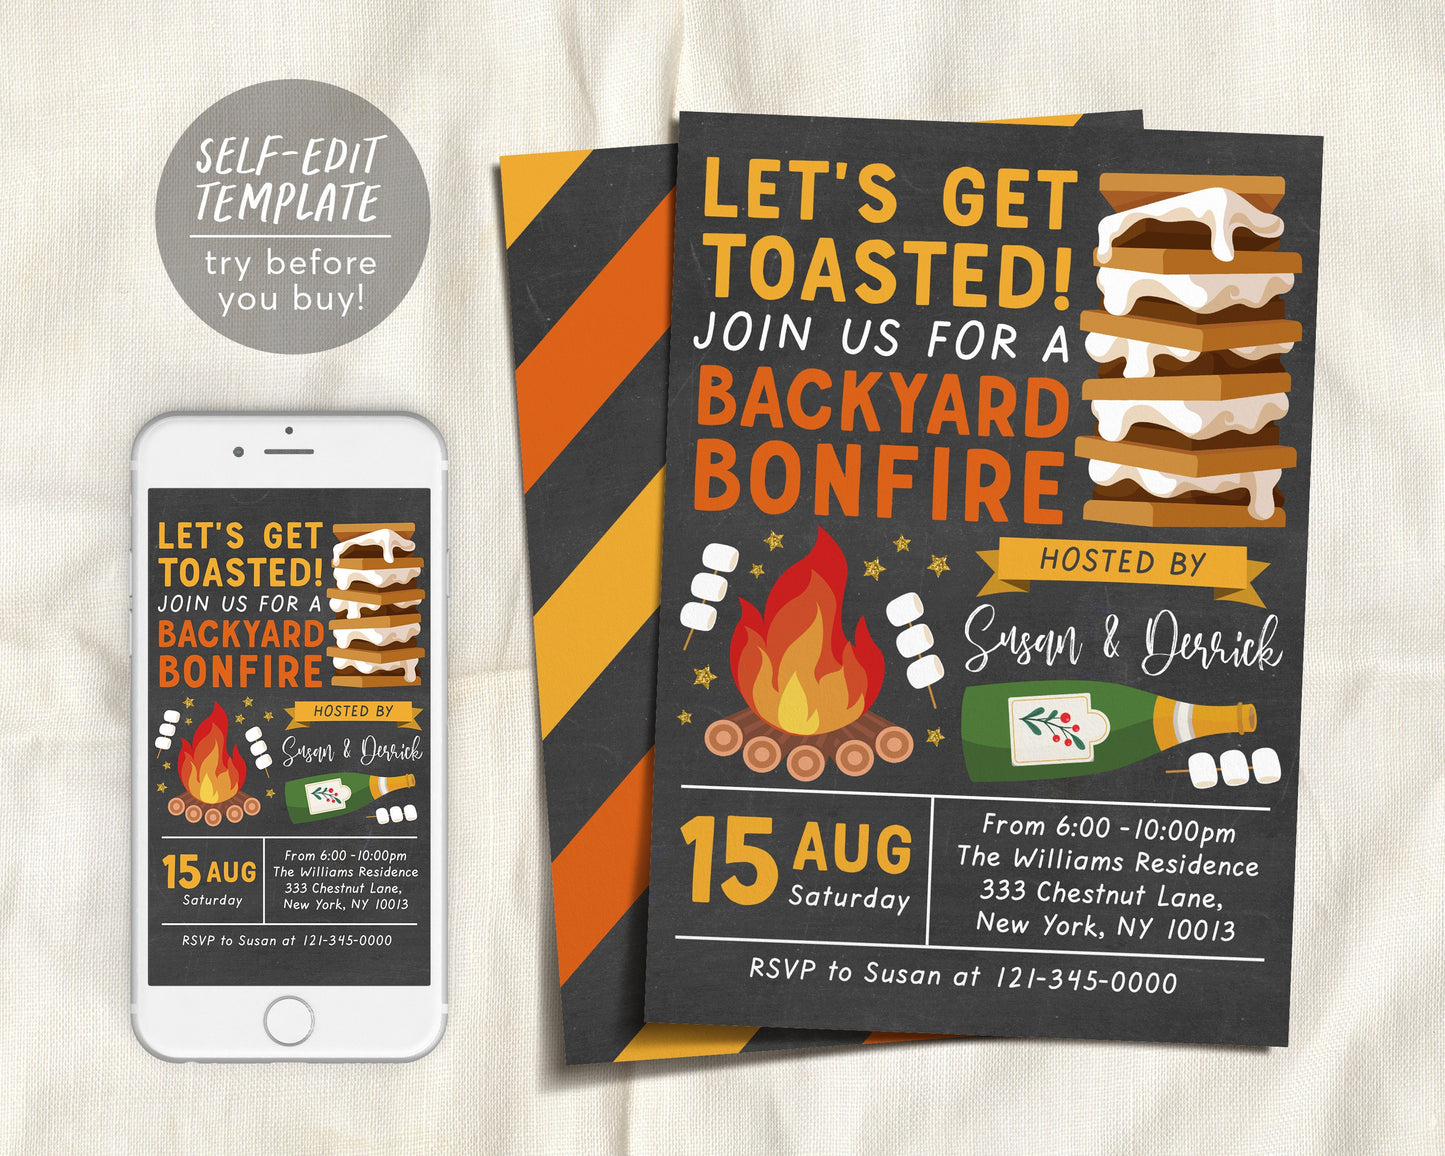 Let's Get Toasted Backyard Bonfire Invitation Editable Template, Fall Harvest Autumn S'mores Bonfire And Cocktails Party Invite Printable